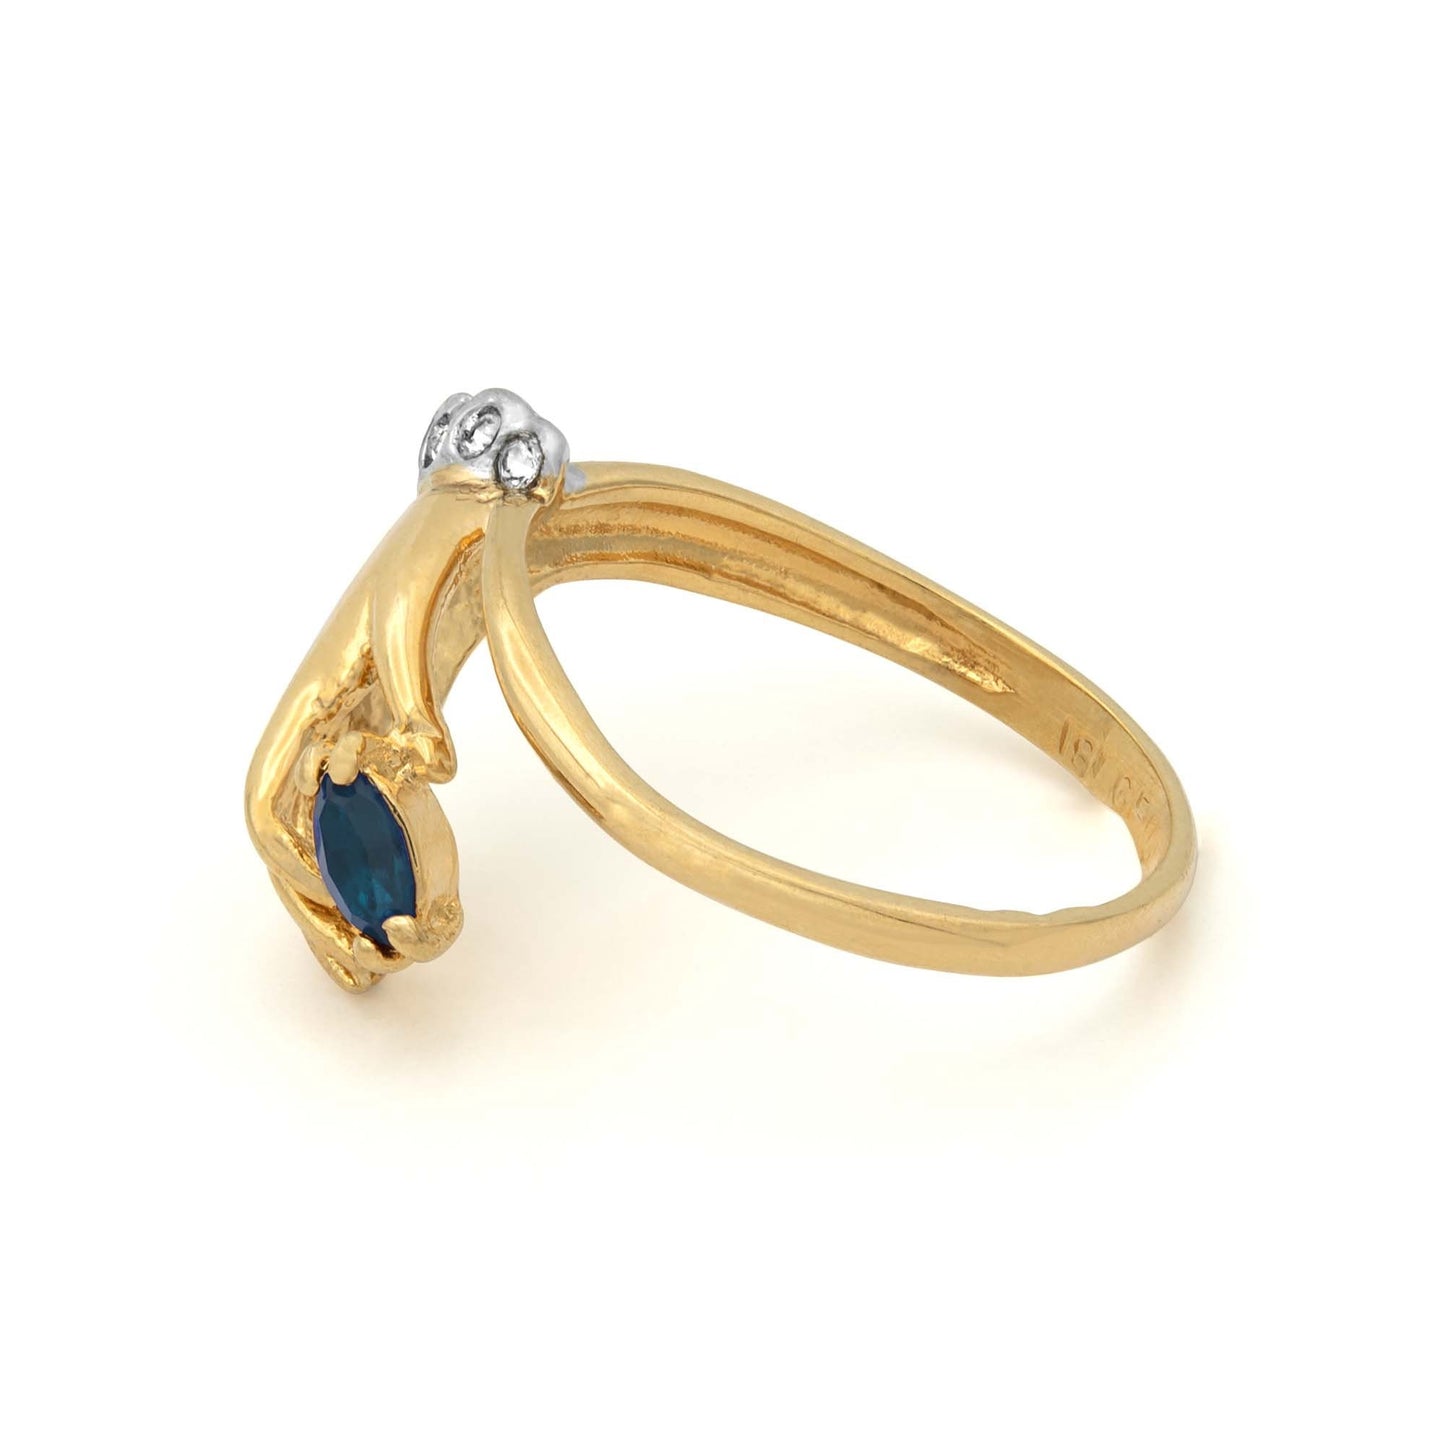 Vintage Ring Sapphire and Clear Austrian Crystals 18k Gold Antique Ring #R2964 - Limited Stock - Never Worn